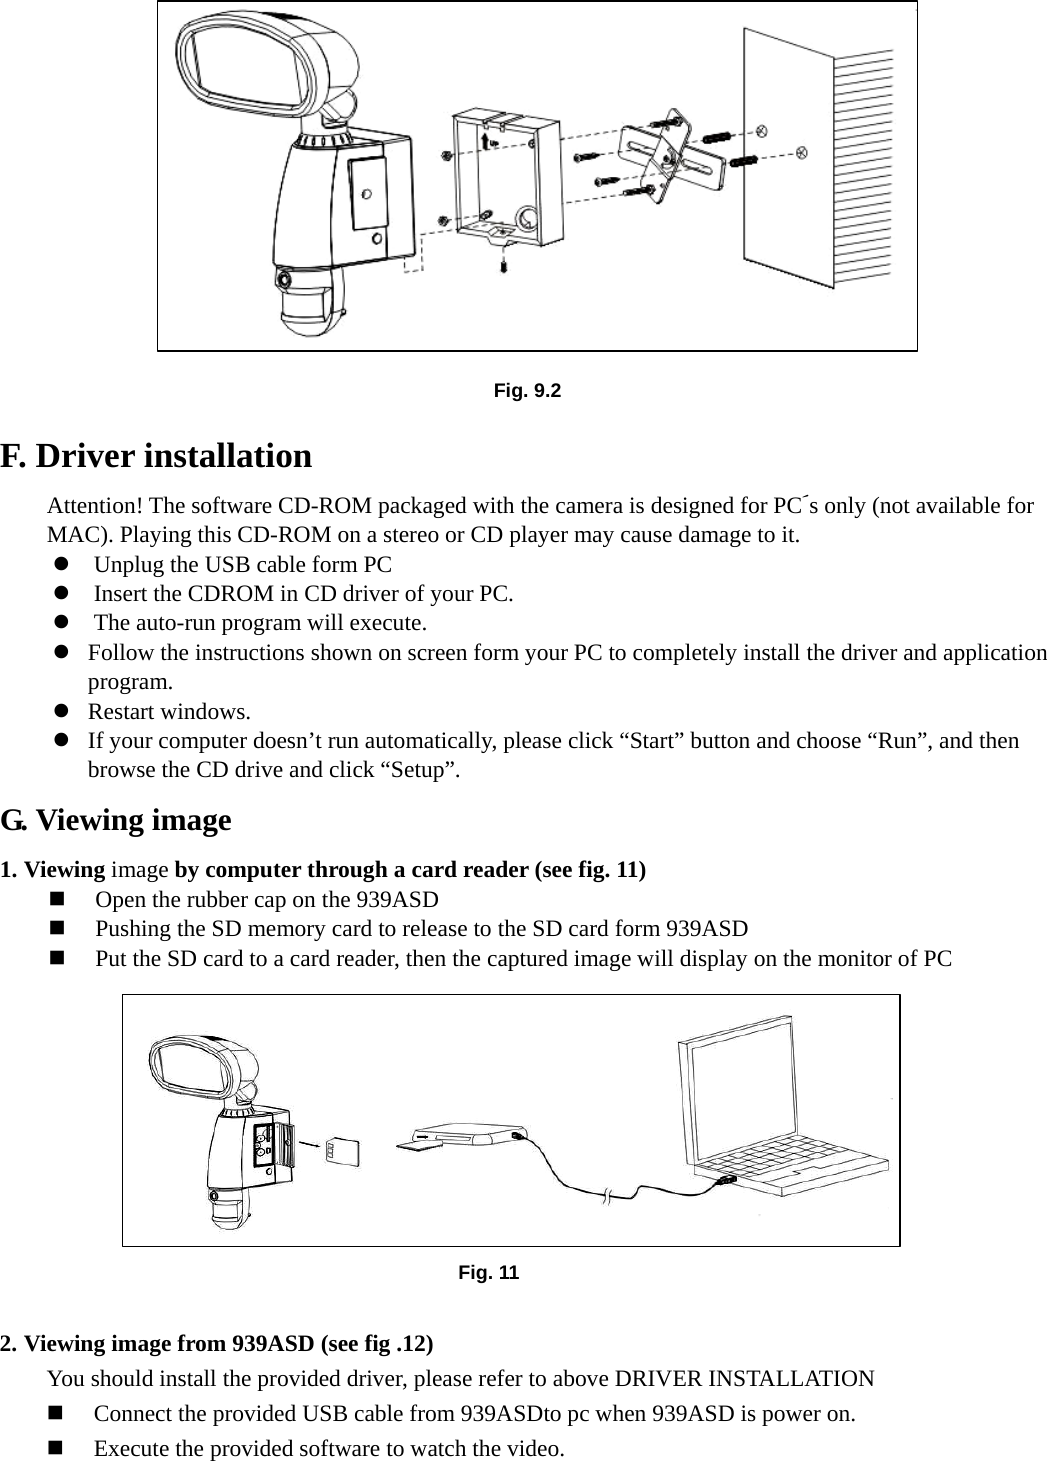        F. Driver installation         Attention! The software CD-ROM packaged with the camera is designed for PC´s only (not available for MAC). Playing this CD-ROM on a stereo or CD player may cause damage to it. z Unplug the USB cable form PC z Insert the CDROM in CD driver of your PC. z The auto-run program will execute. z Follow the instructions shown on screen form your PC to completely install the driver and application program. z Restart windows. z If your computer doesn’t run automatically, please click “Start” button and choose “Run”, and then browse the CD drive and click “Setup”. G. Viewing image 1. Viewing image by computer through a card reader (see fig. 11)      Open the rubber cap on the 939ASD  Pushing the SD memory card to release to the SD card form 939ASD  Put the SD card to a card reader, then the captured image will display on the monitor of PC           2. Viewing image from 939ASD (see fig .12) You should install the provided driver, please refer to above DRIVER INSTALLATION  Connect the provided USB cable from 939ASDto pc when 939ASD is power on.  Execute the provided software to watch the video. Fig. 11 Fig. 9.2 